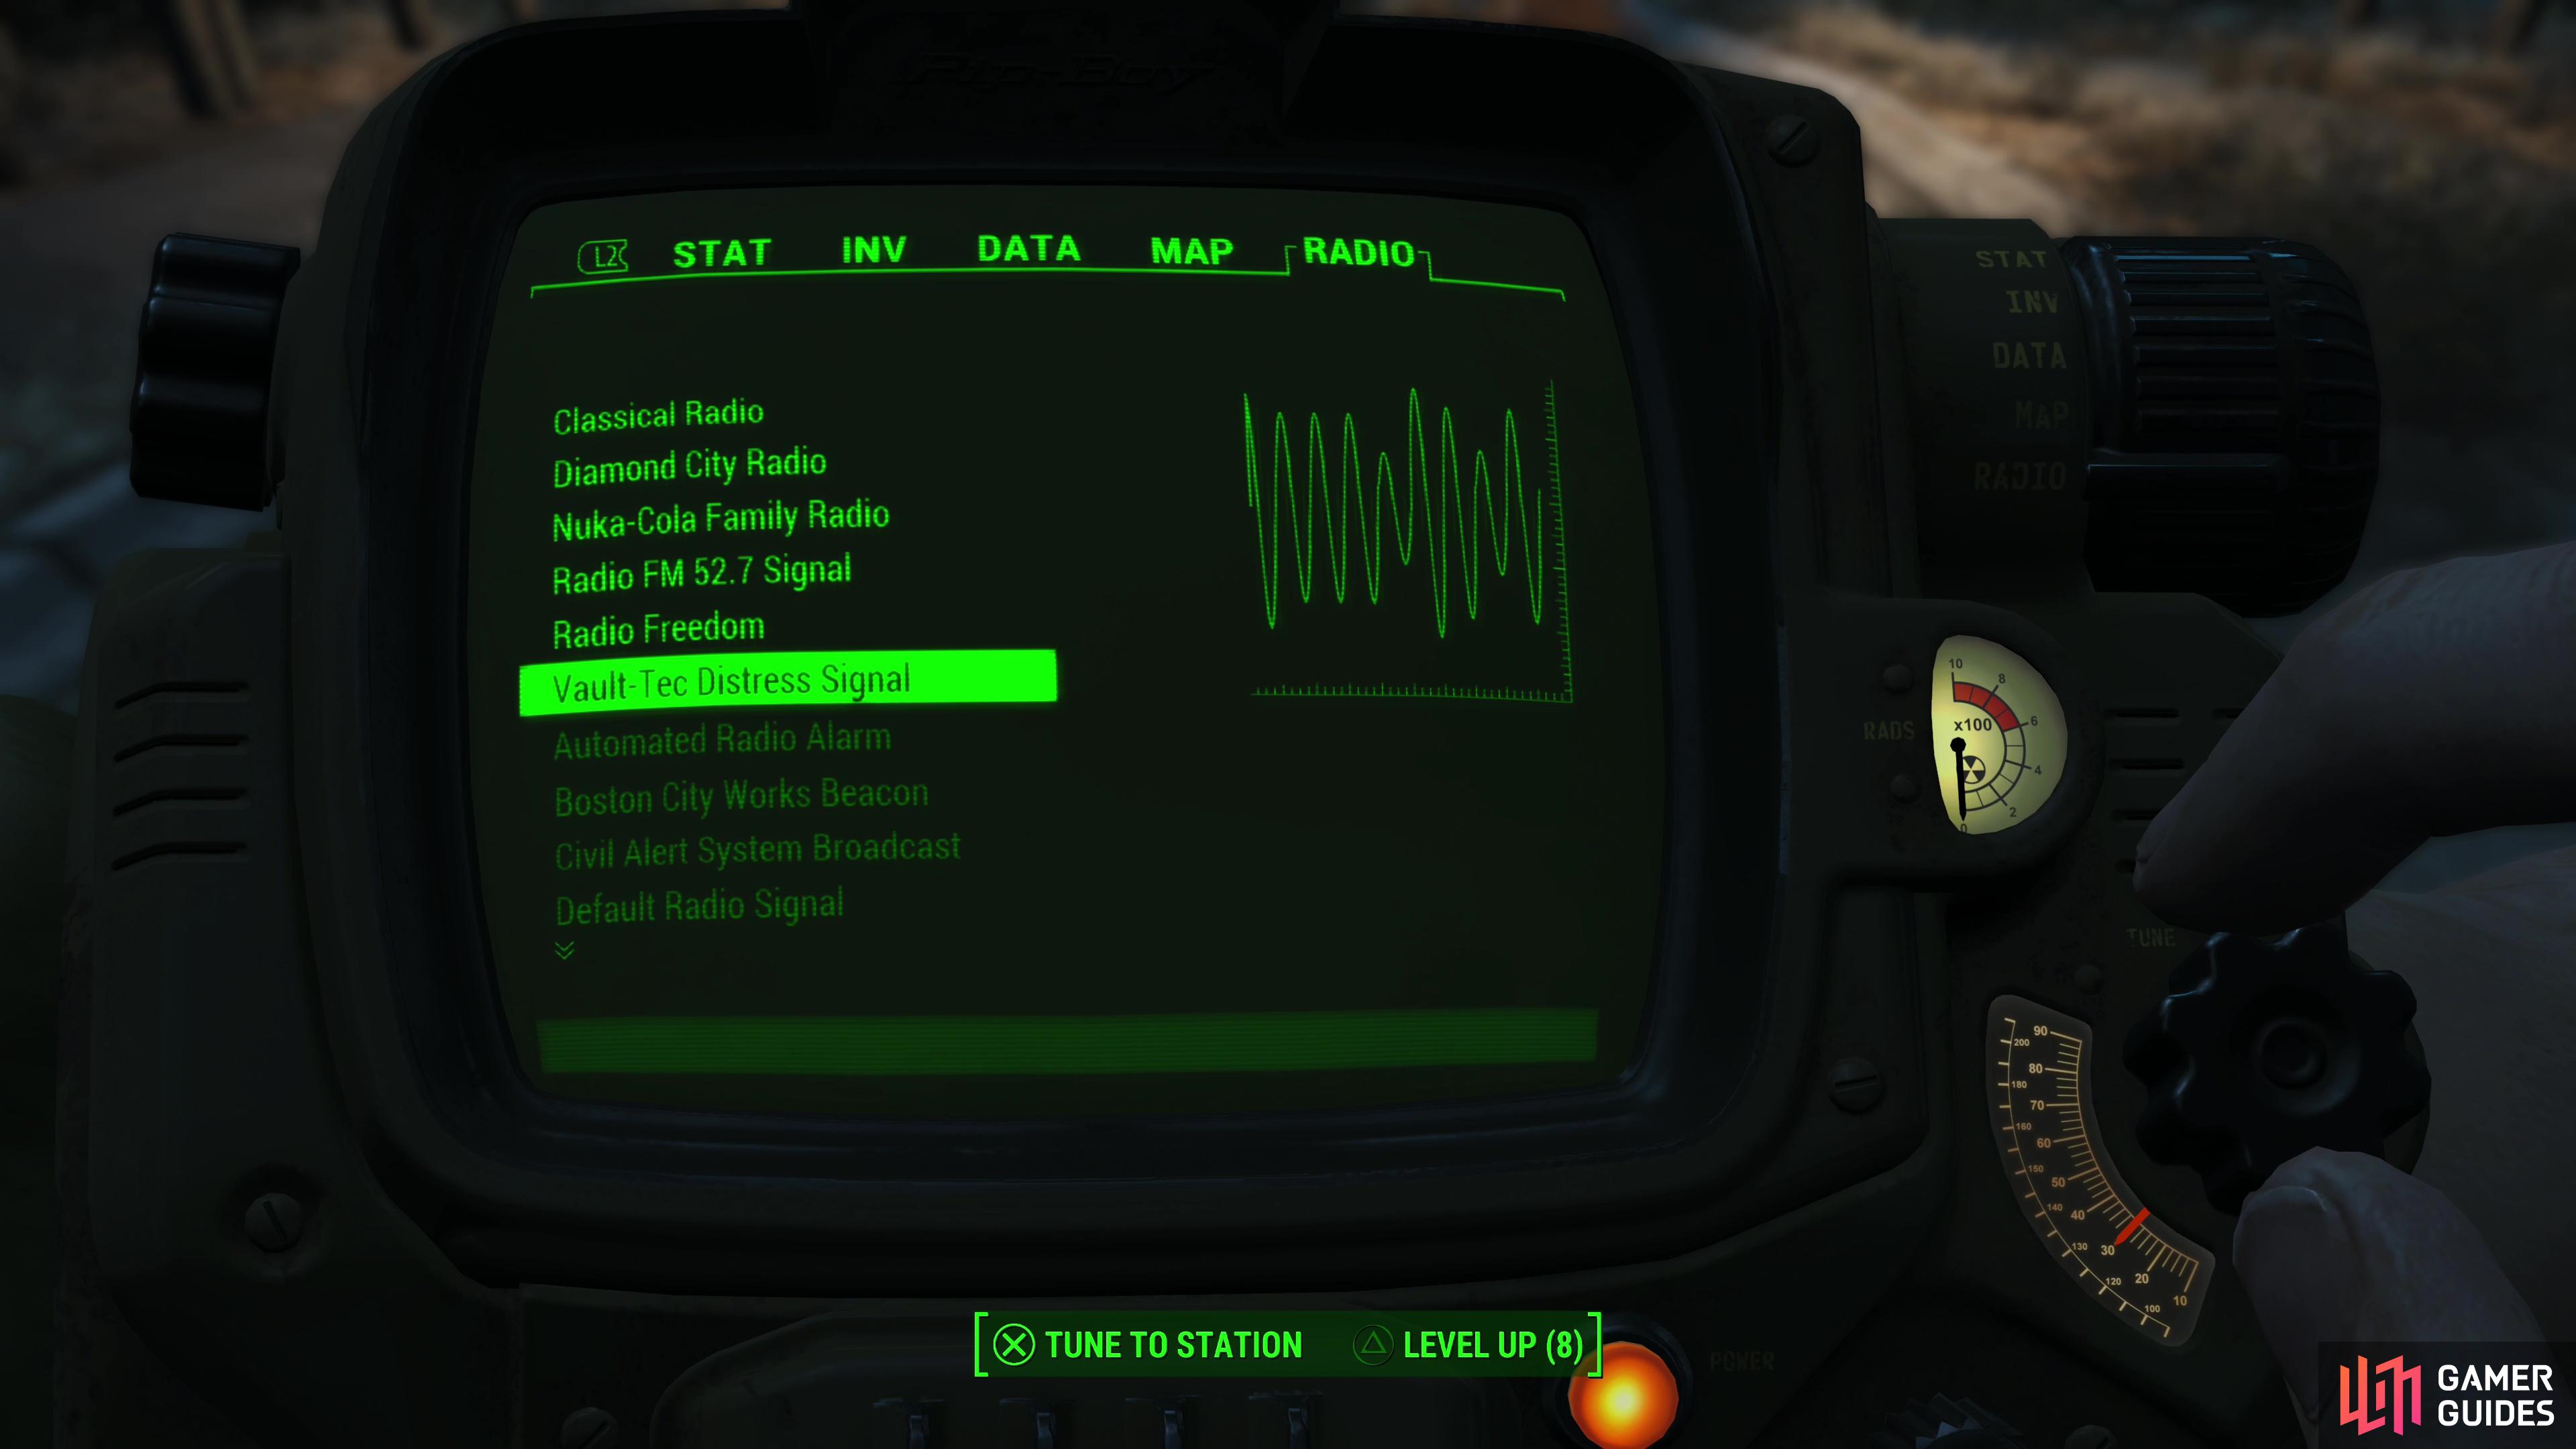 To start this quest, tune into the Vault-Tec Distress Signal.